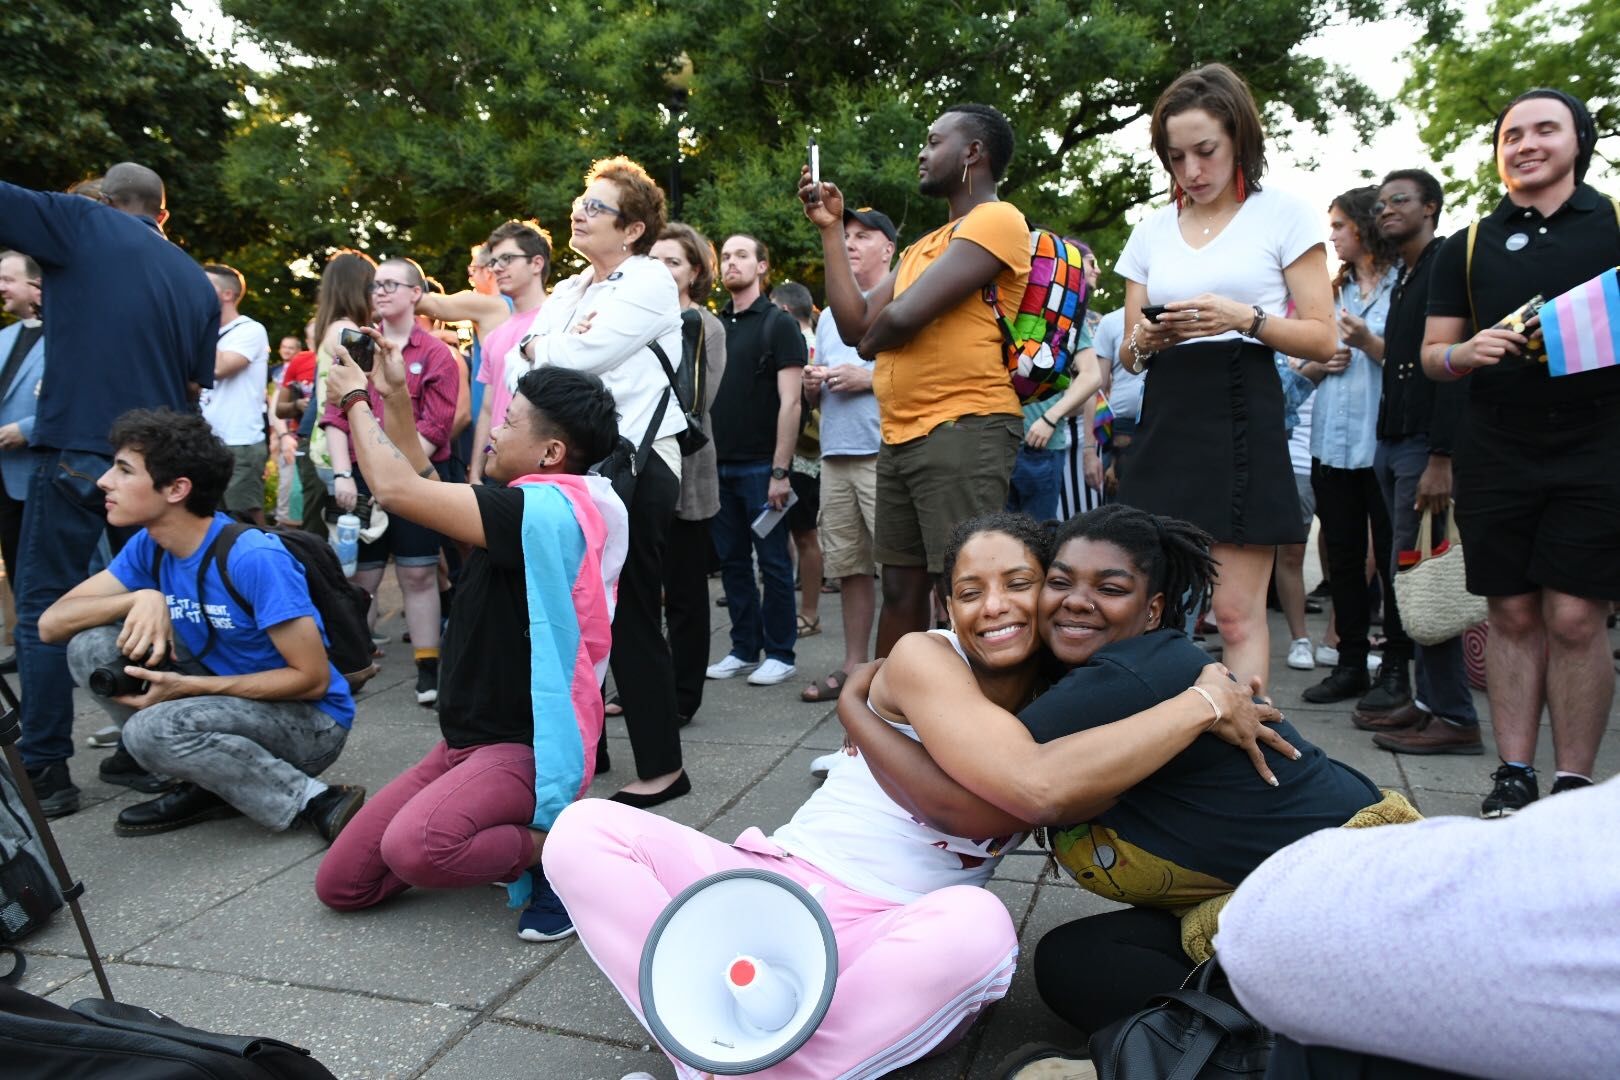 In the wake of recent violence against the LGBTQ community in the D.C. area, including the killing of two transgender women, supporters gathered in Dupont Circle Friday night for a vigil. (WTOP/Alejandro Alvarez)